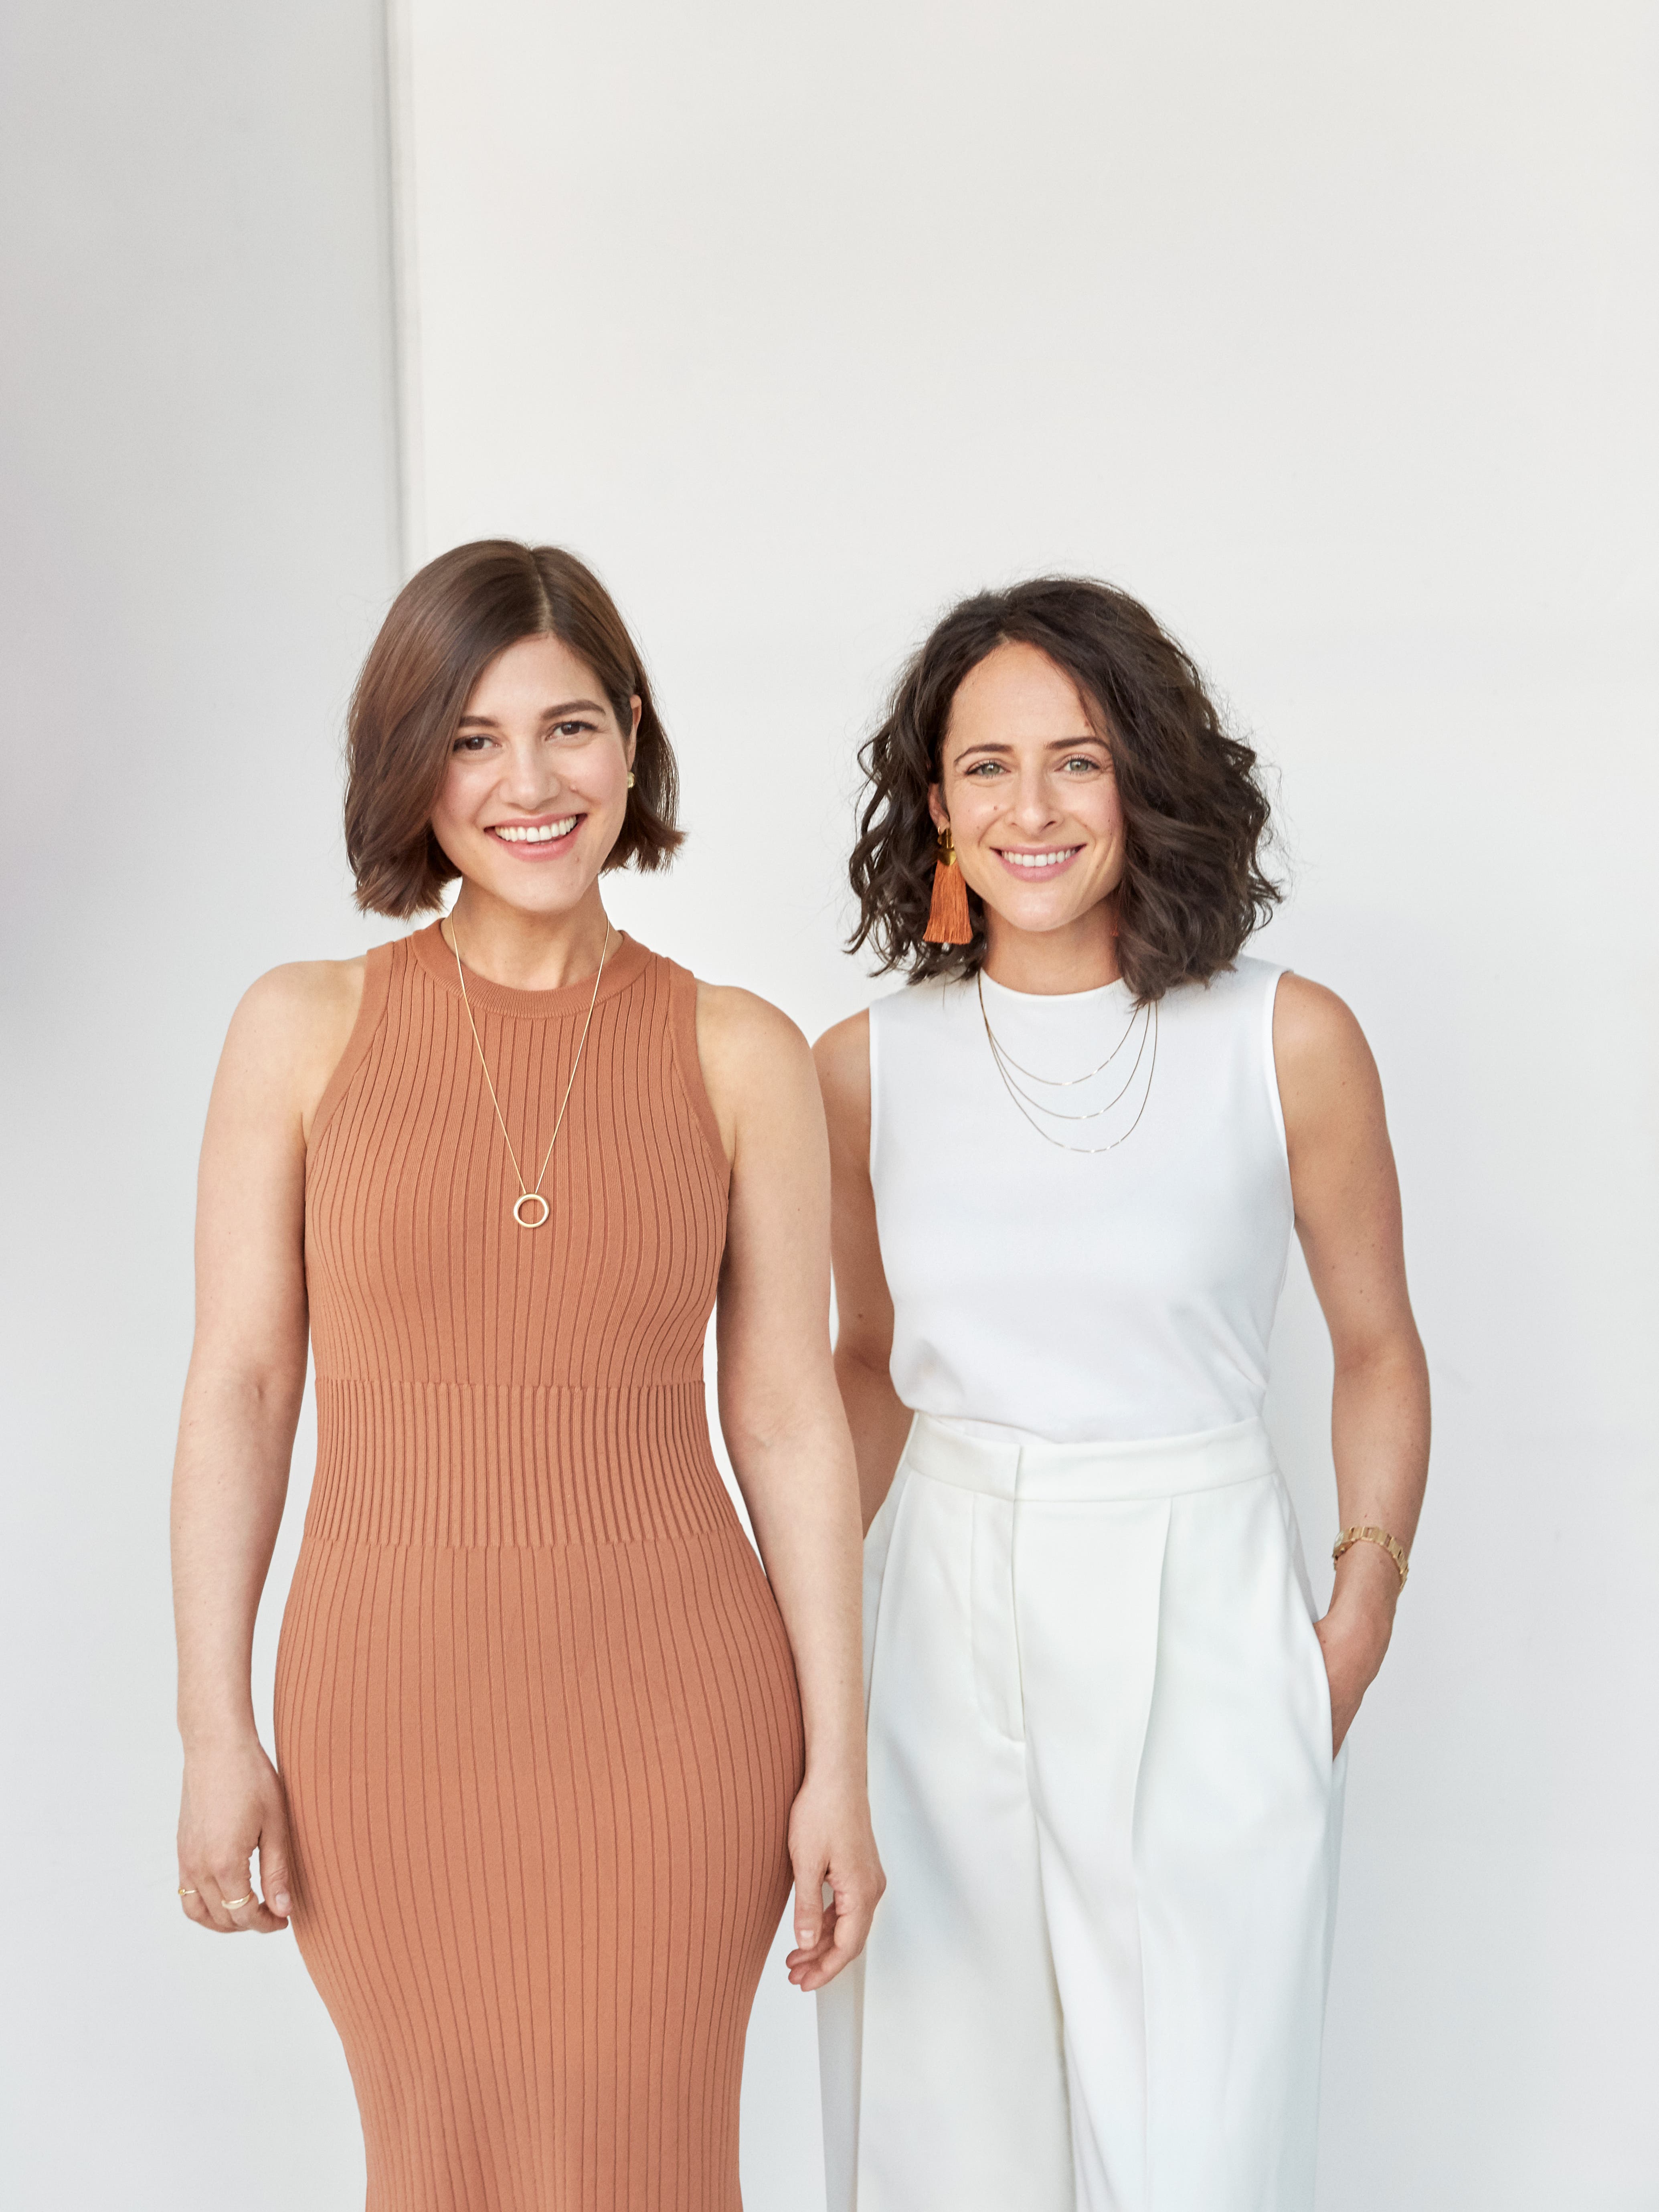 Why You Should Have a Work Wife, According to One Power Duo